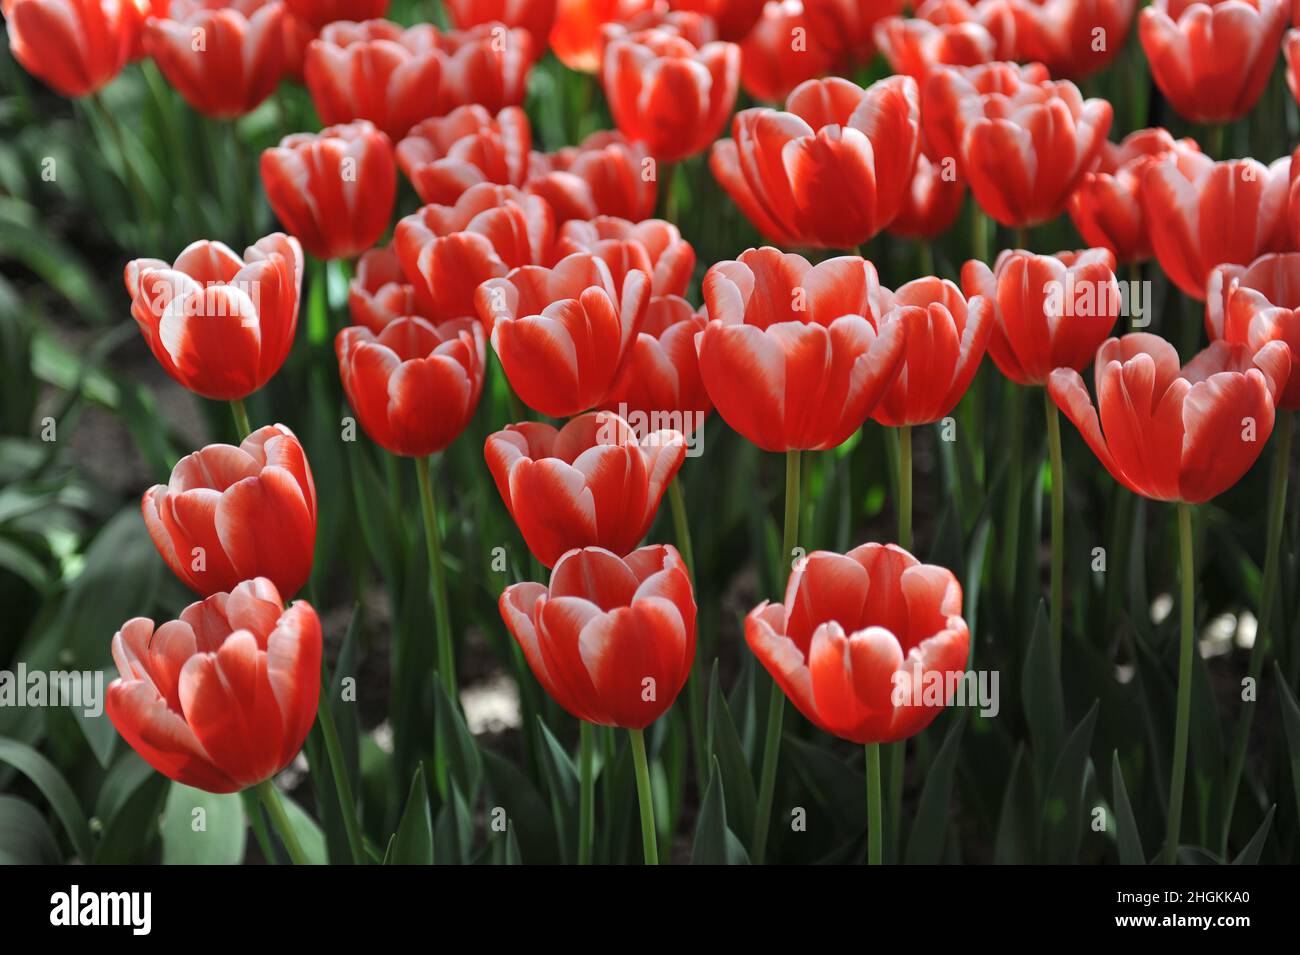 Red and white Triumph tulips (Tulipa) Jan Smit bloom in a garden in April Stock Photo